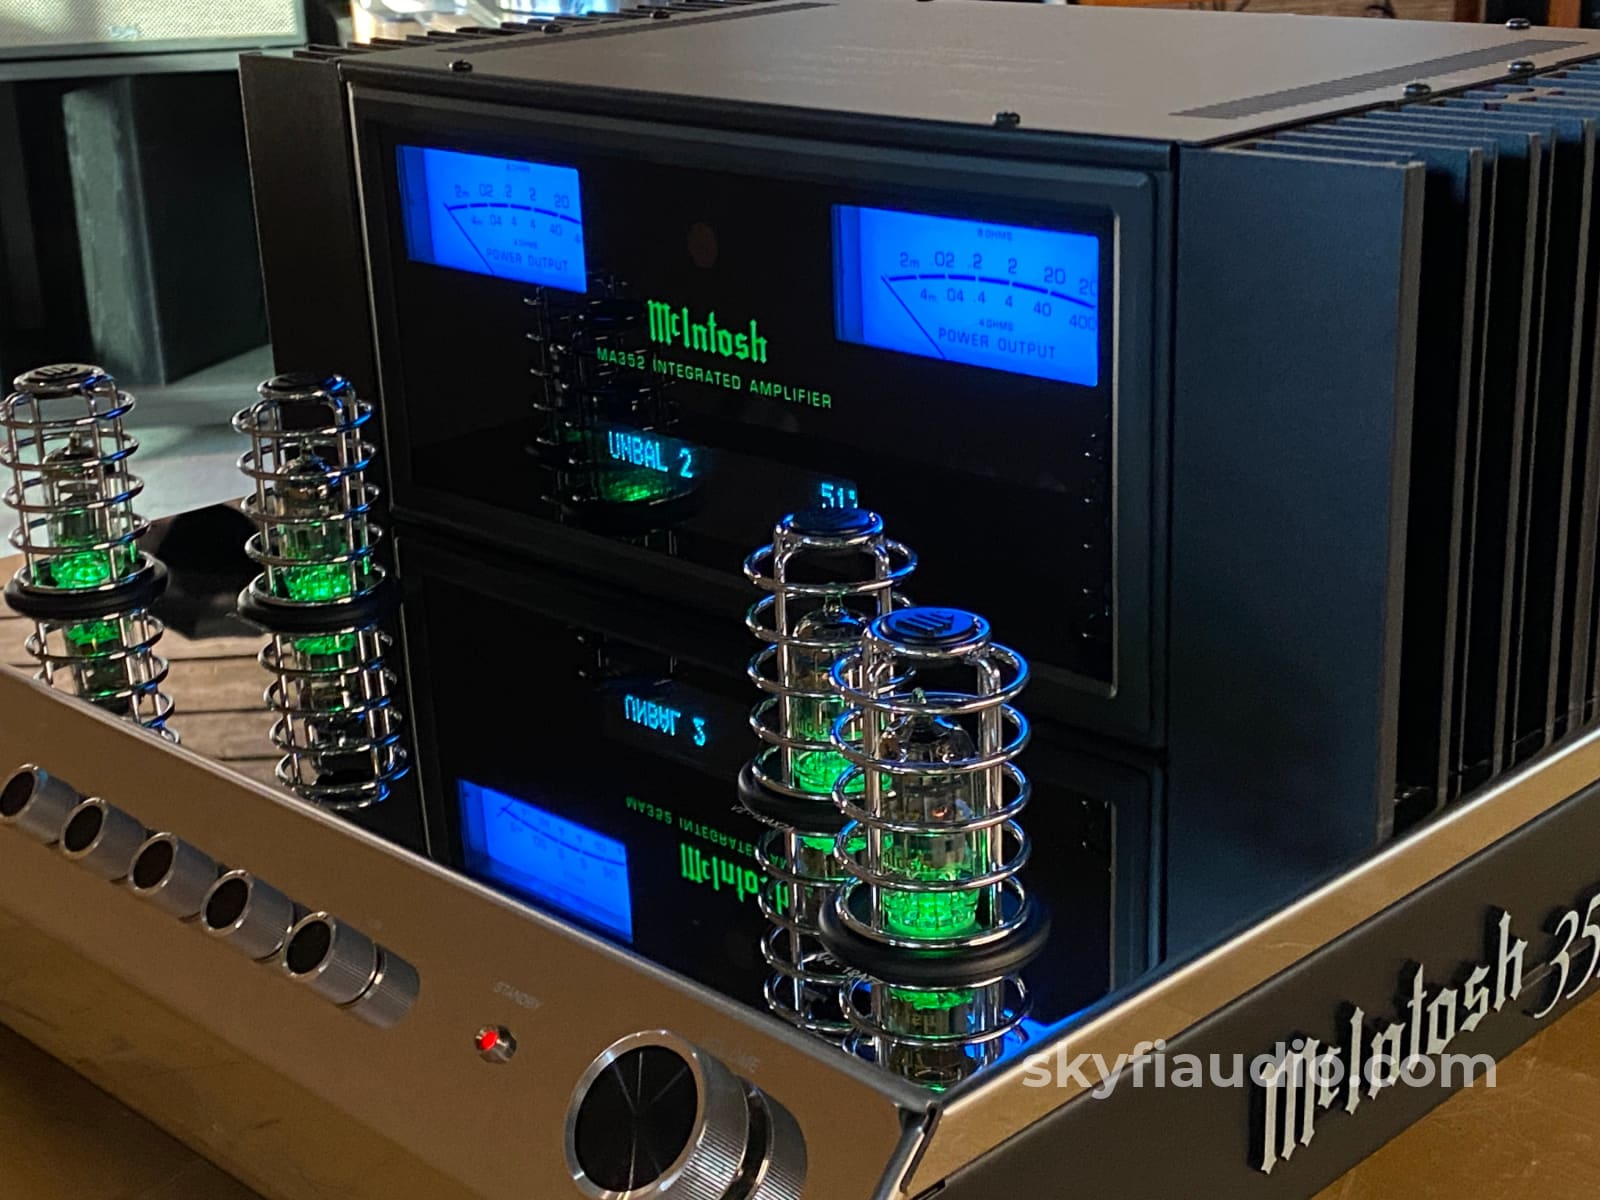 Mcintosh Ma352 Hybrid Drive Integrated Amplifier - Pre-Owned